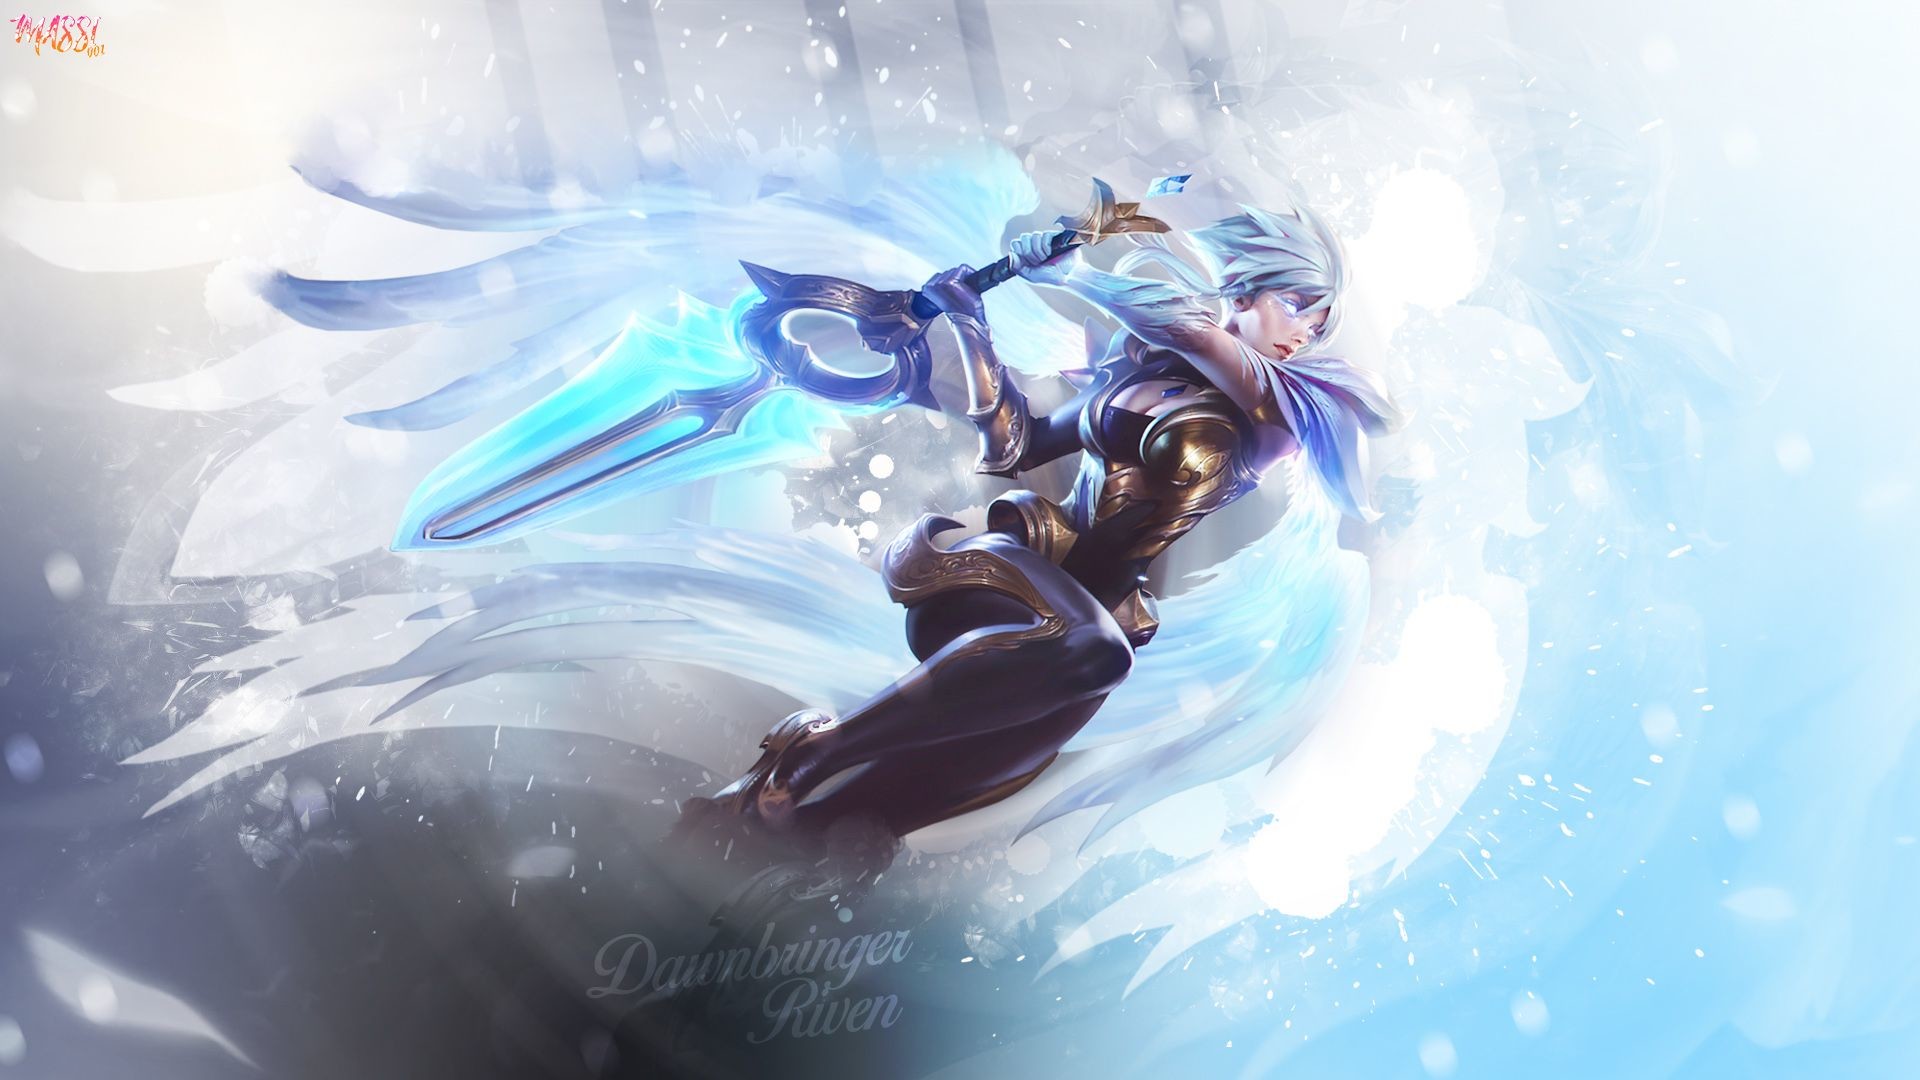 1920x1080 Riven - LoL Wallpapers | HD Wallpapers & Artworks for League of Legends